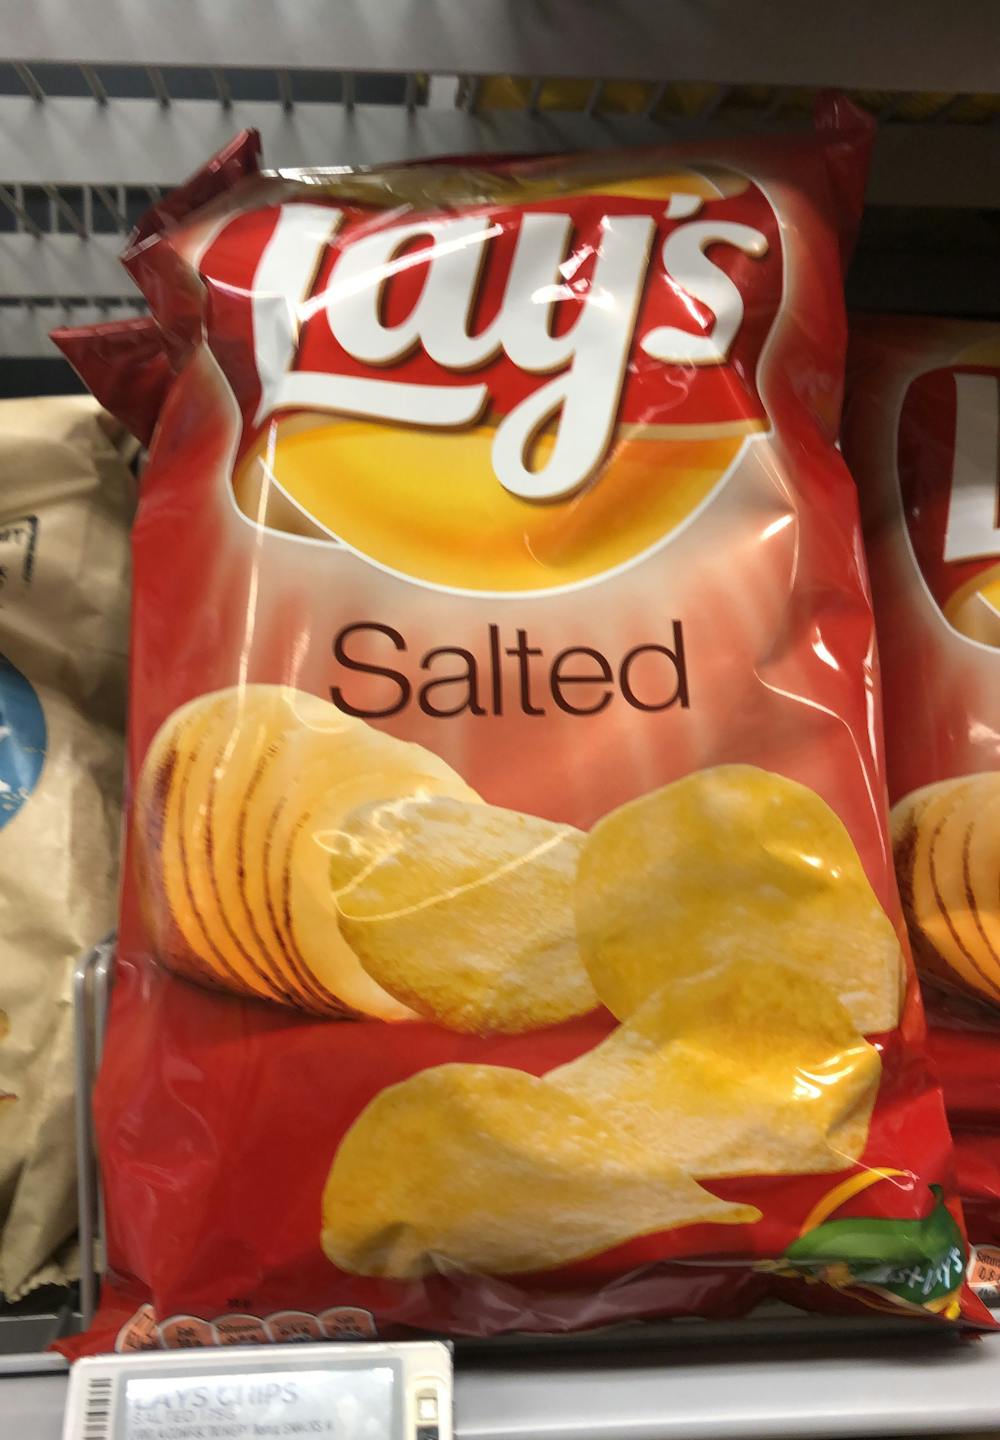 Salted, Lay's